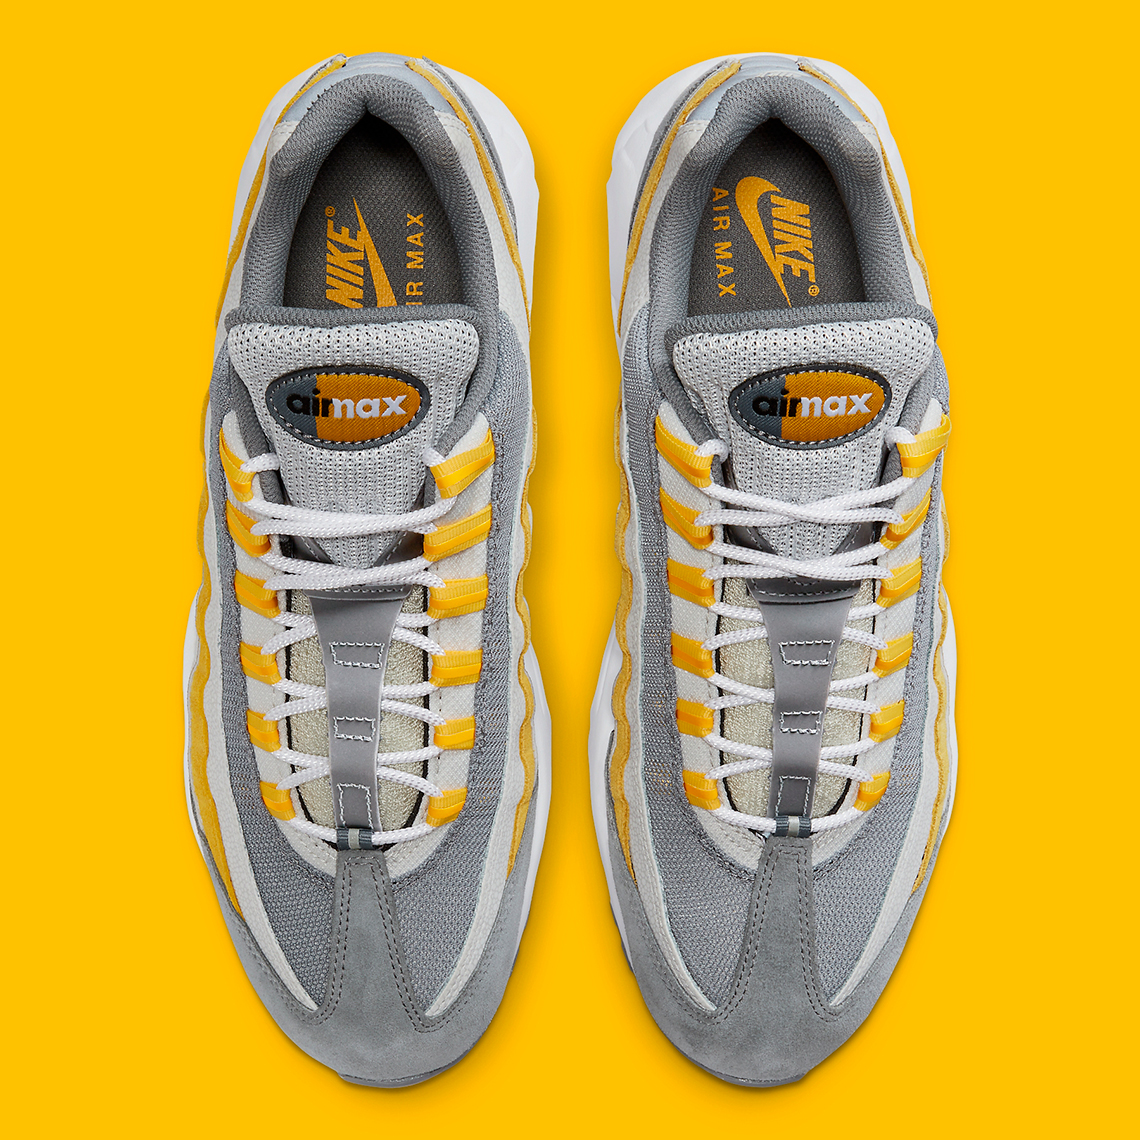 nike tennessee air max 95 grey yellow DM0011 010 4